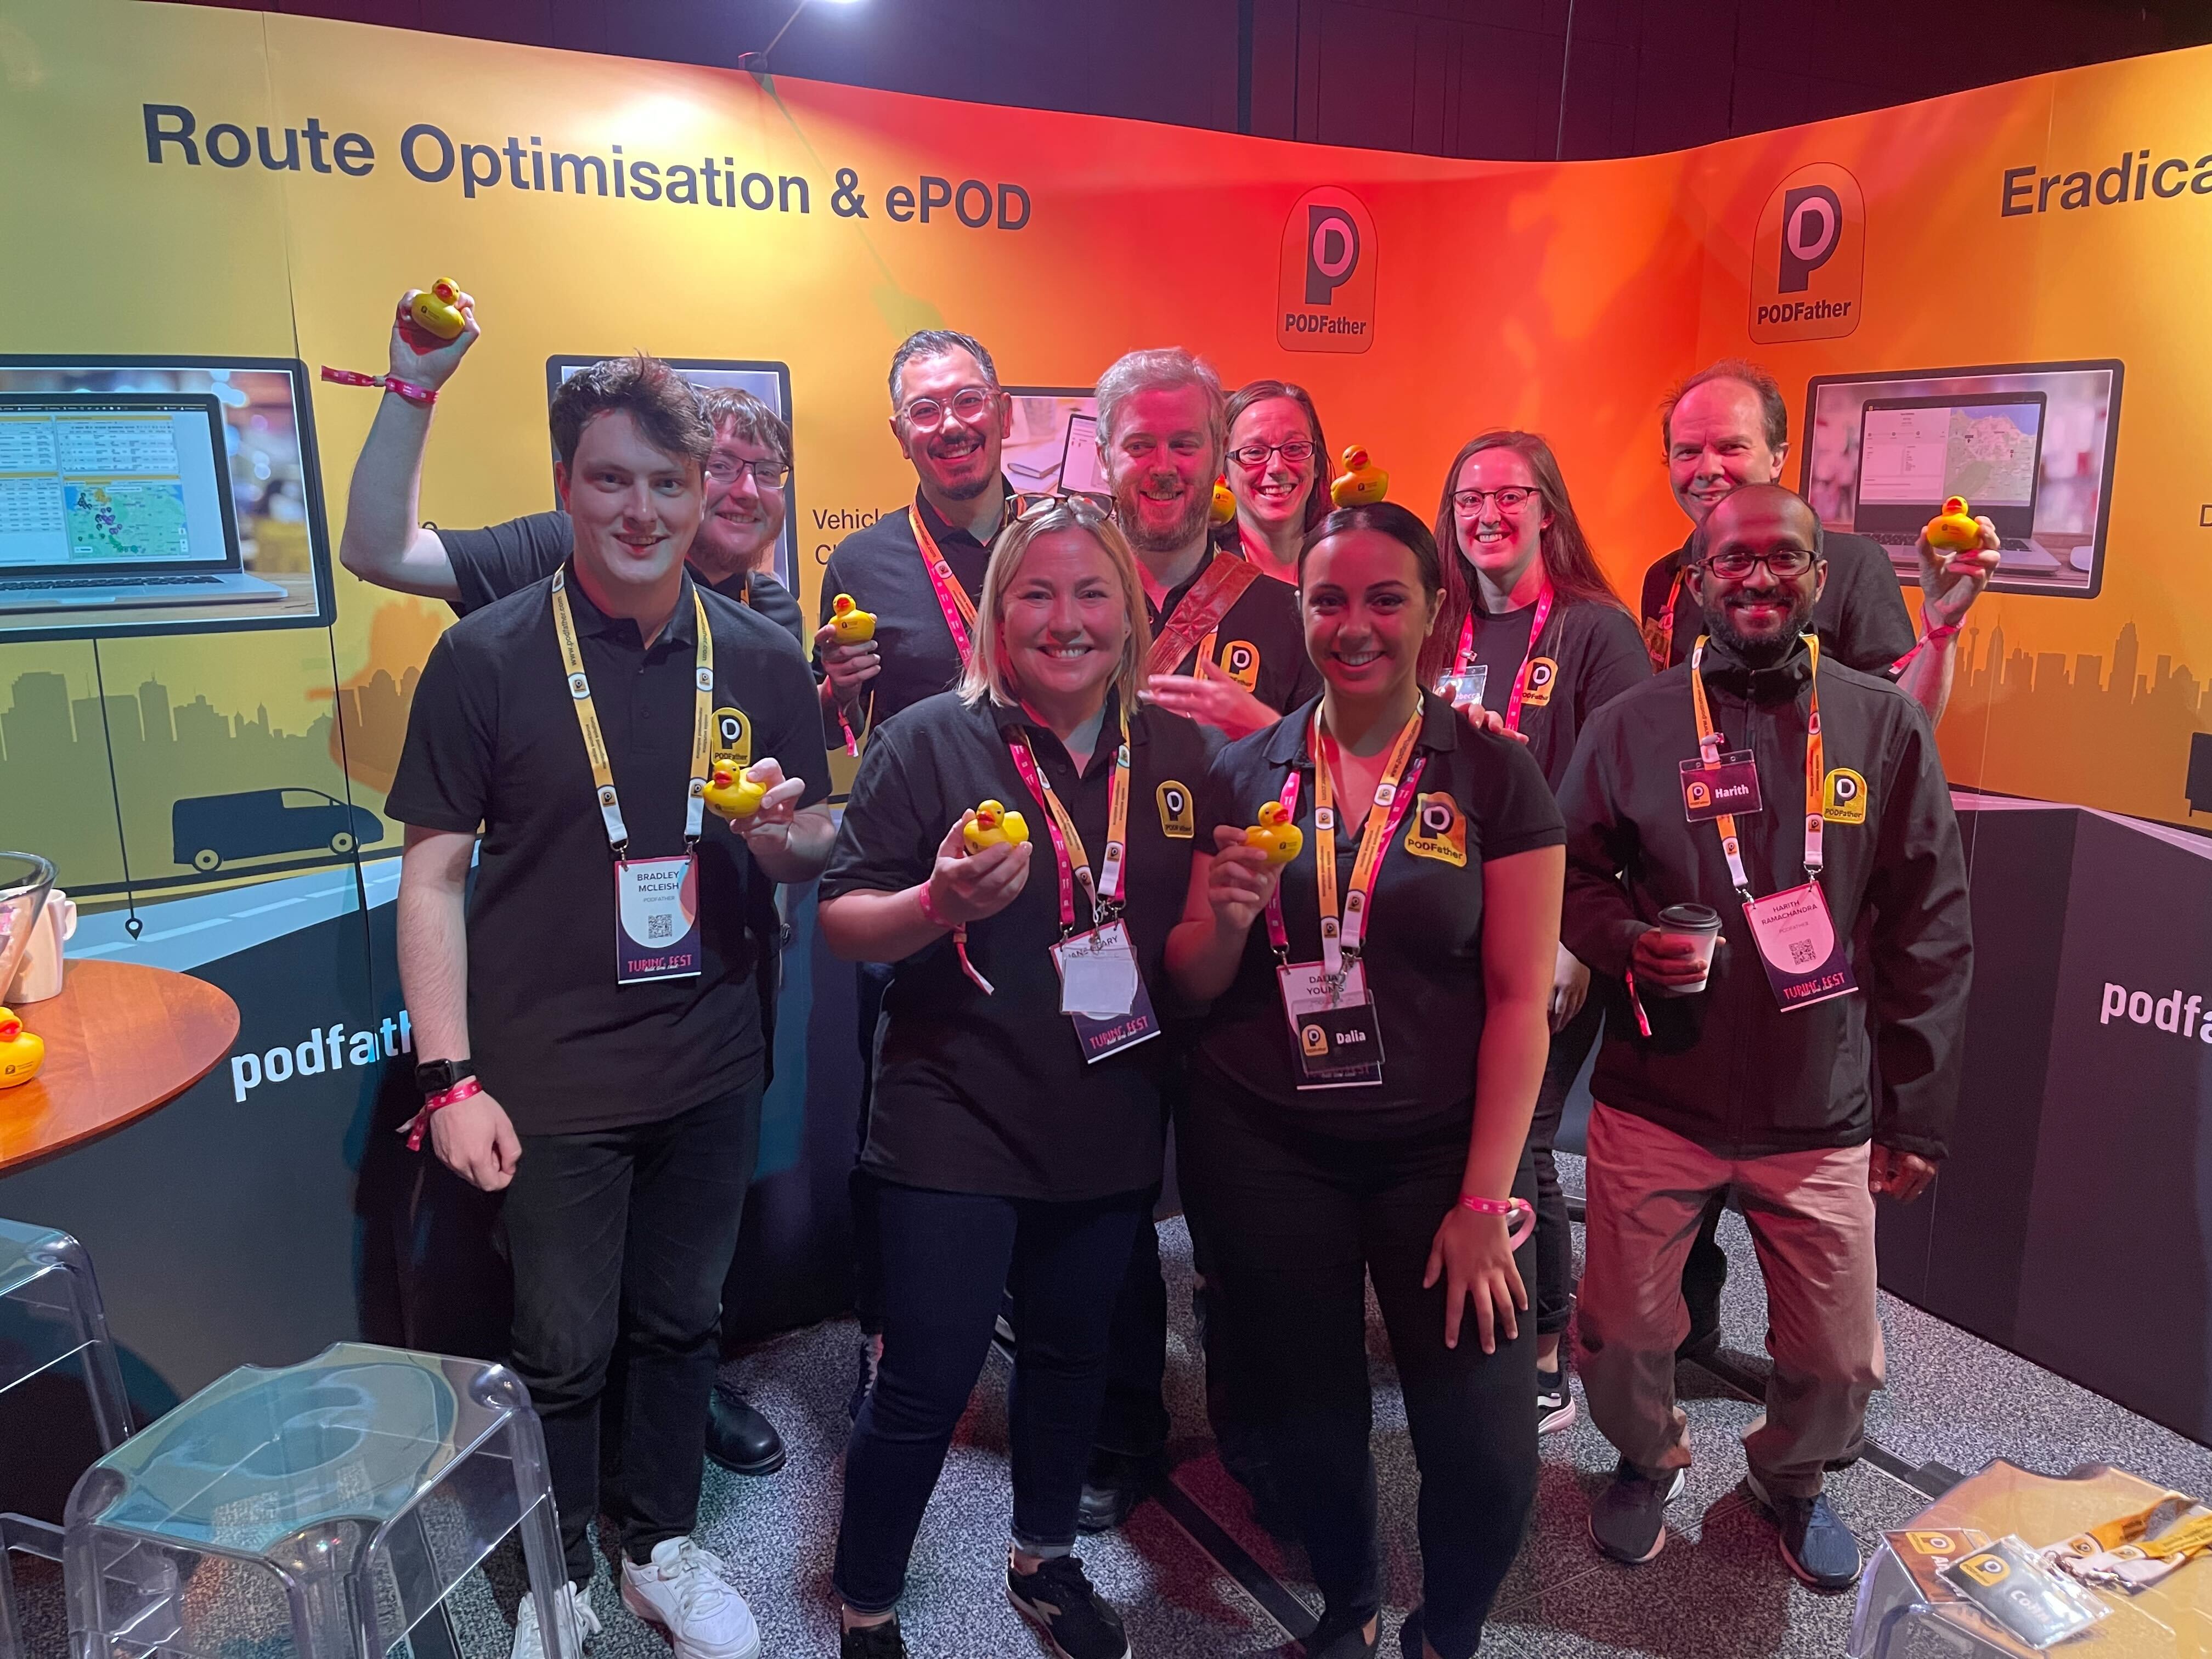 a group of people smiling in front of an exhibition stand